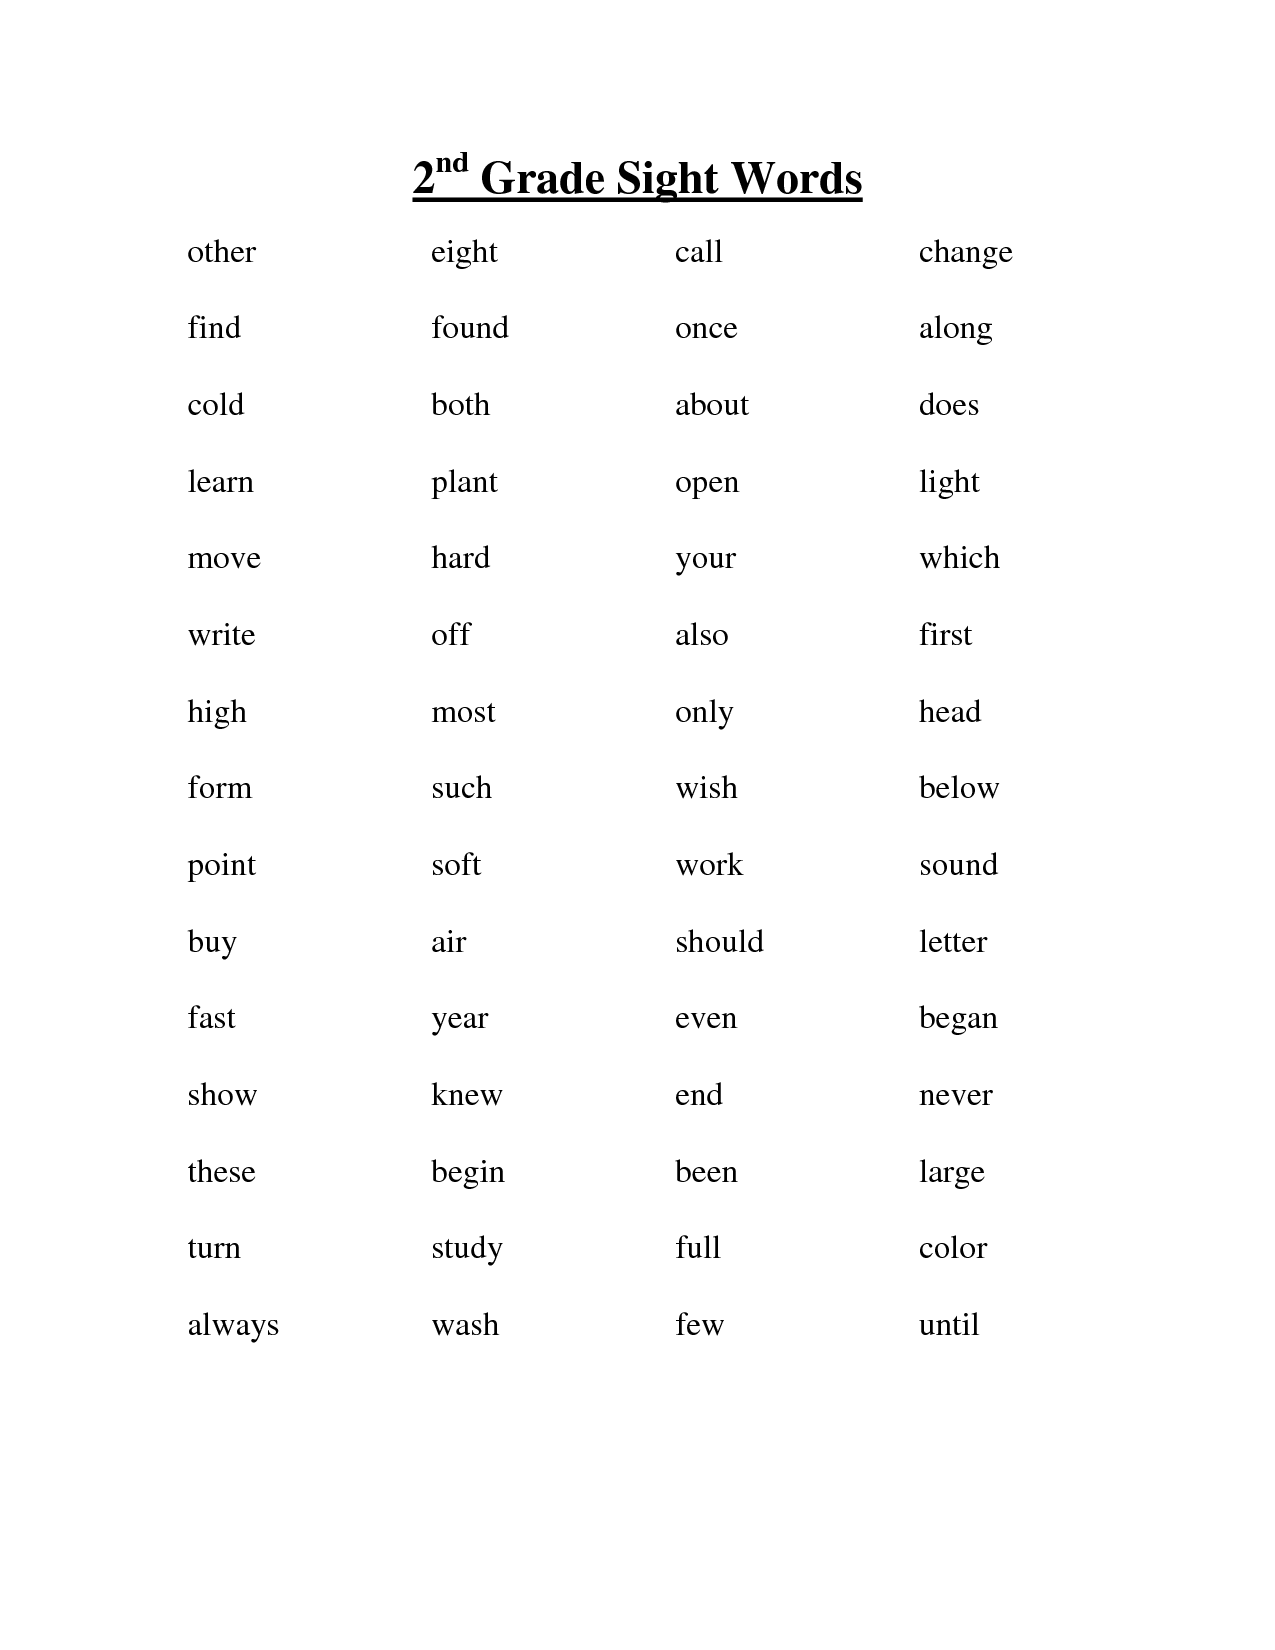 6-best-images-of-2nd-grade-sight-words-printable-second-grade-sight